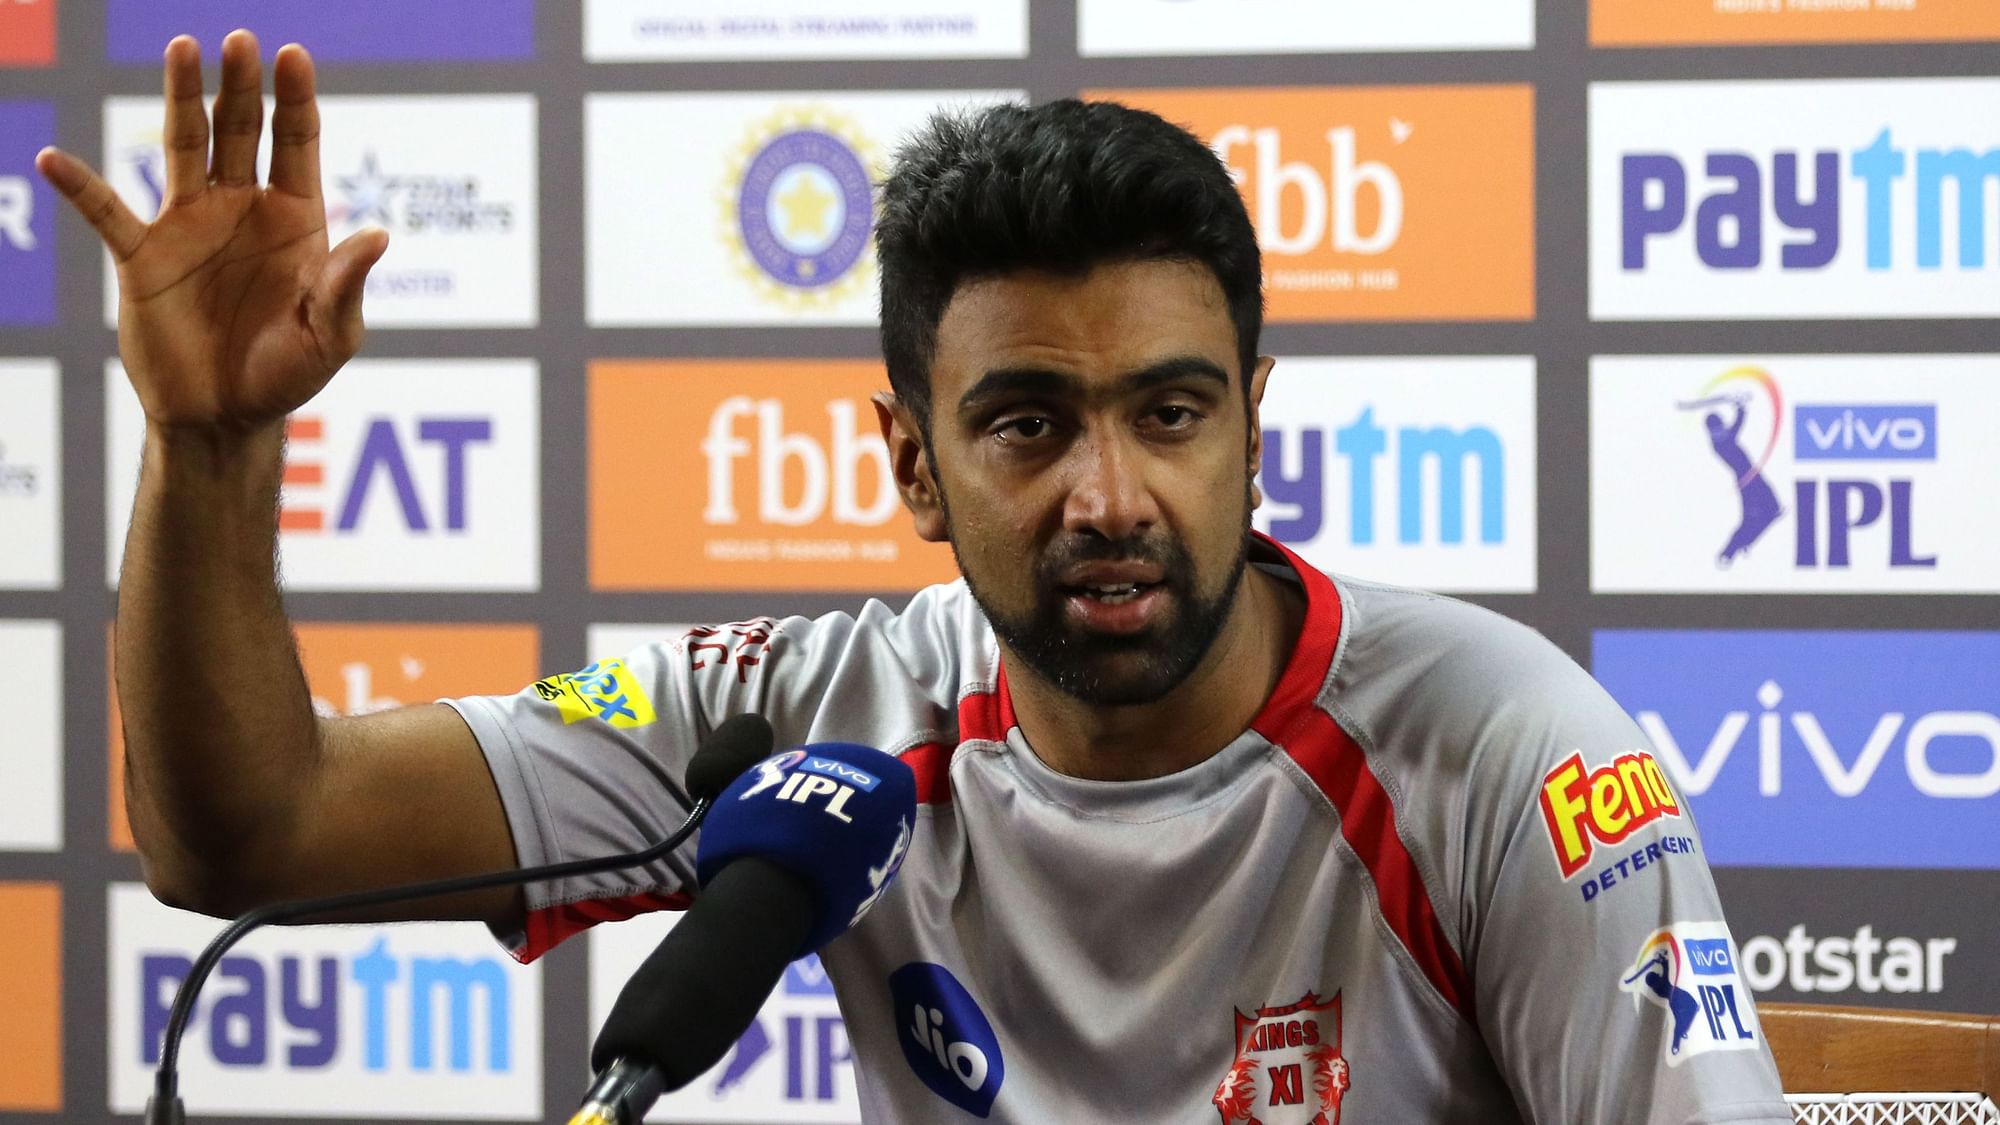 Ashwin says he still has hope of playing the T20 World Cup in Australia next year.